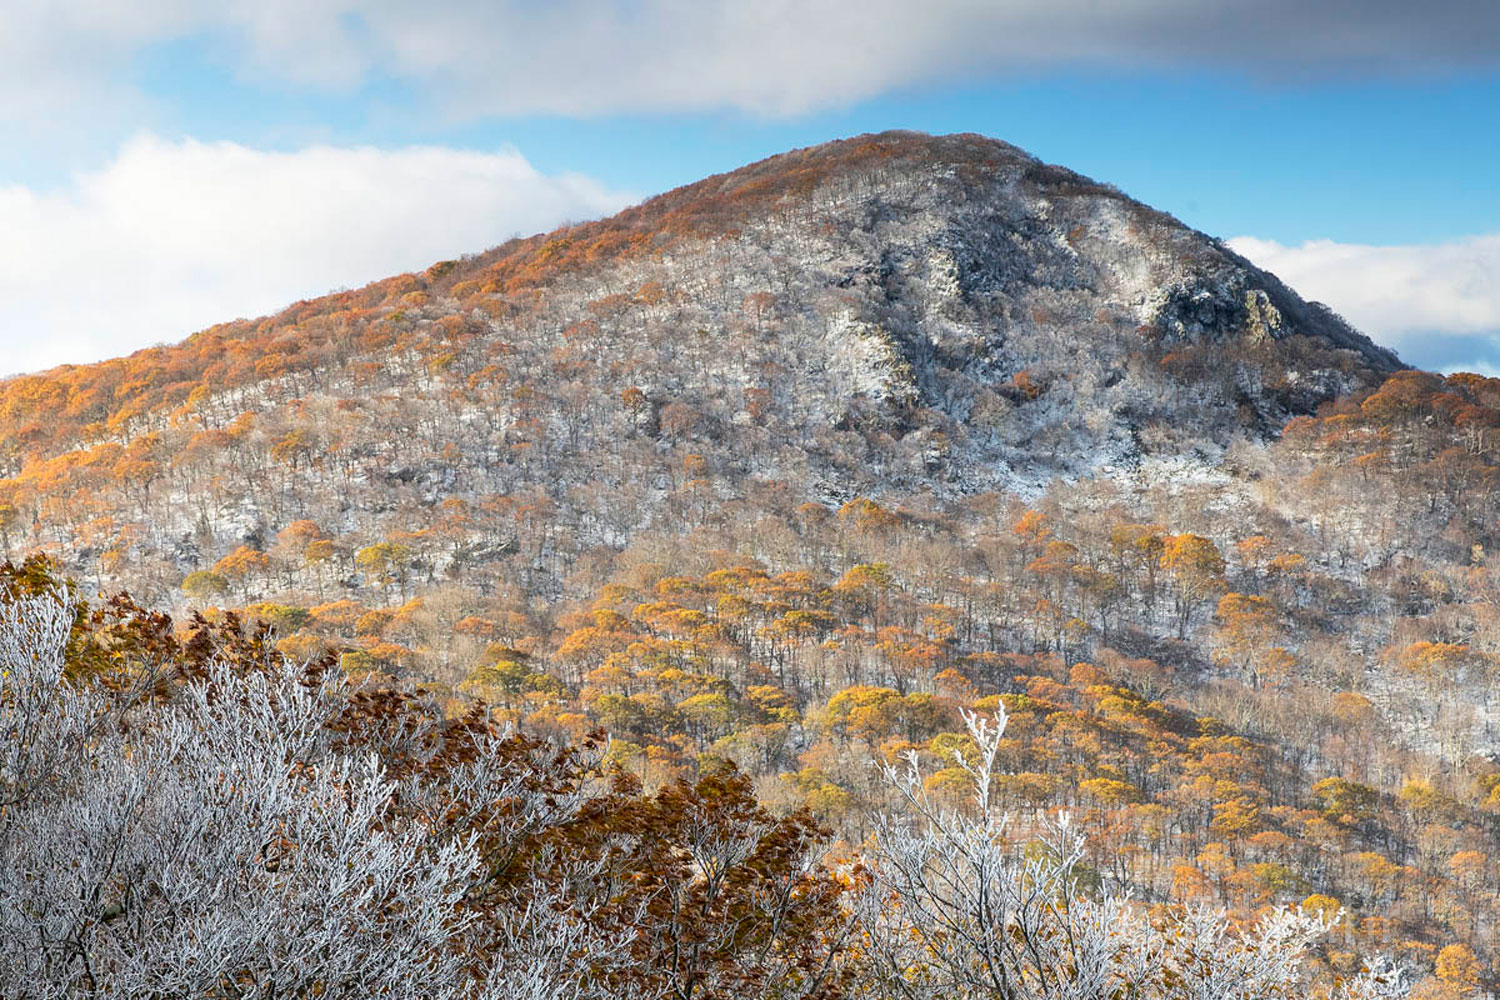 Hawsbill Mountain stands, at 4050 feet, as the tallest mountain in Shenandoah.   That elevation often means it is a few degrees...